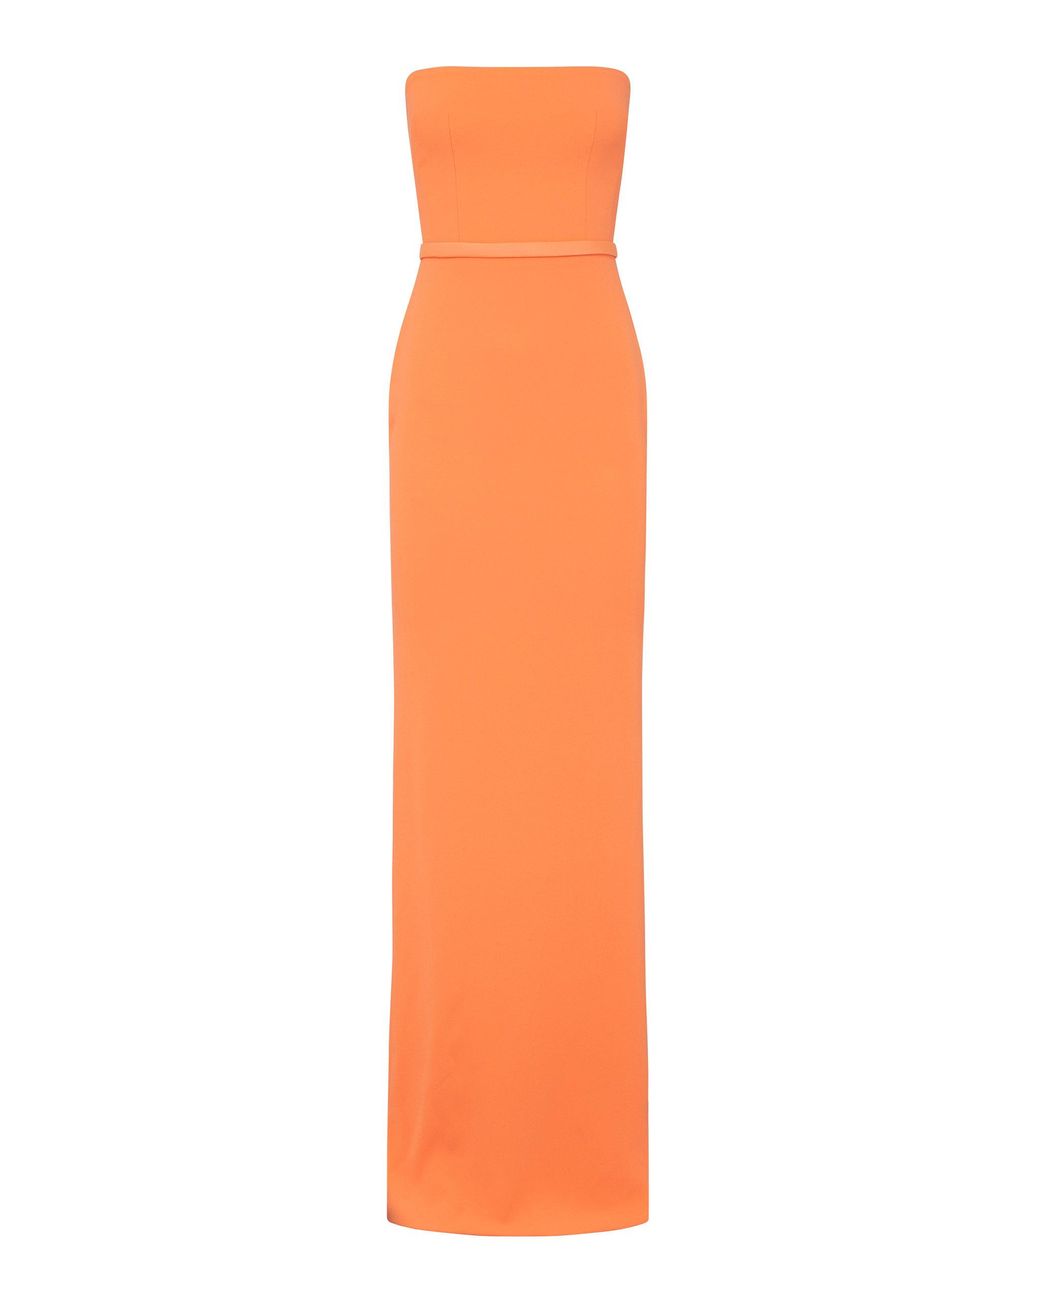 Alex Perry Cassidy Satin Crepe Strapless Column Gown In Orange Lyst 